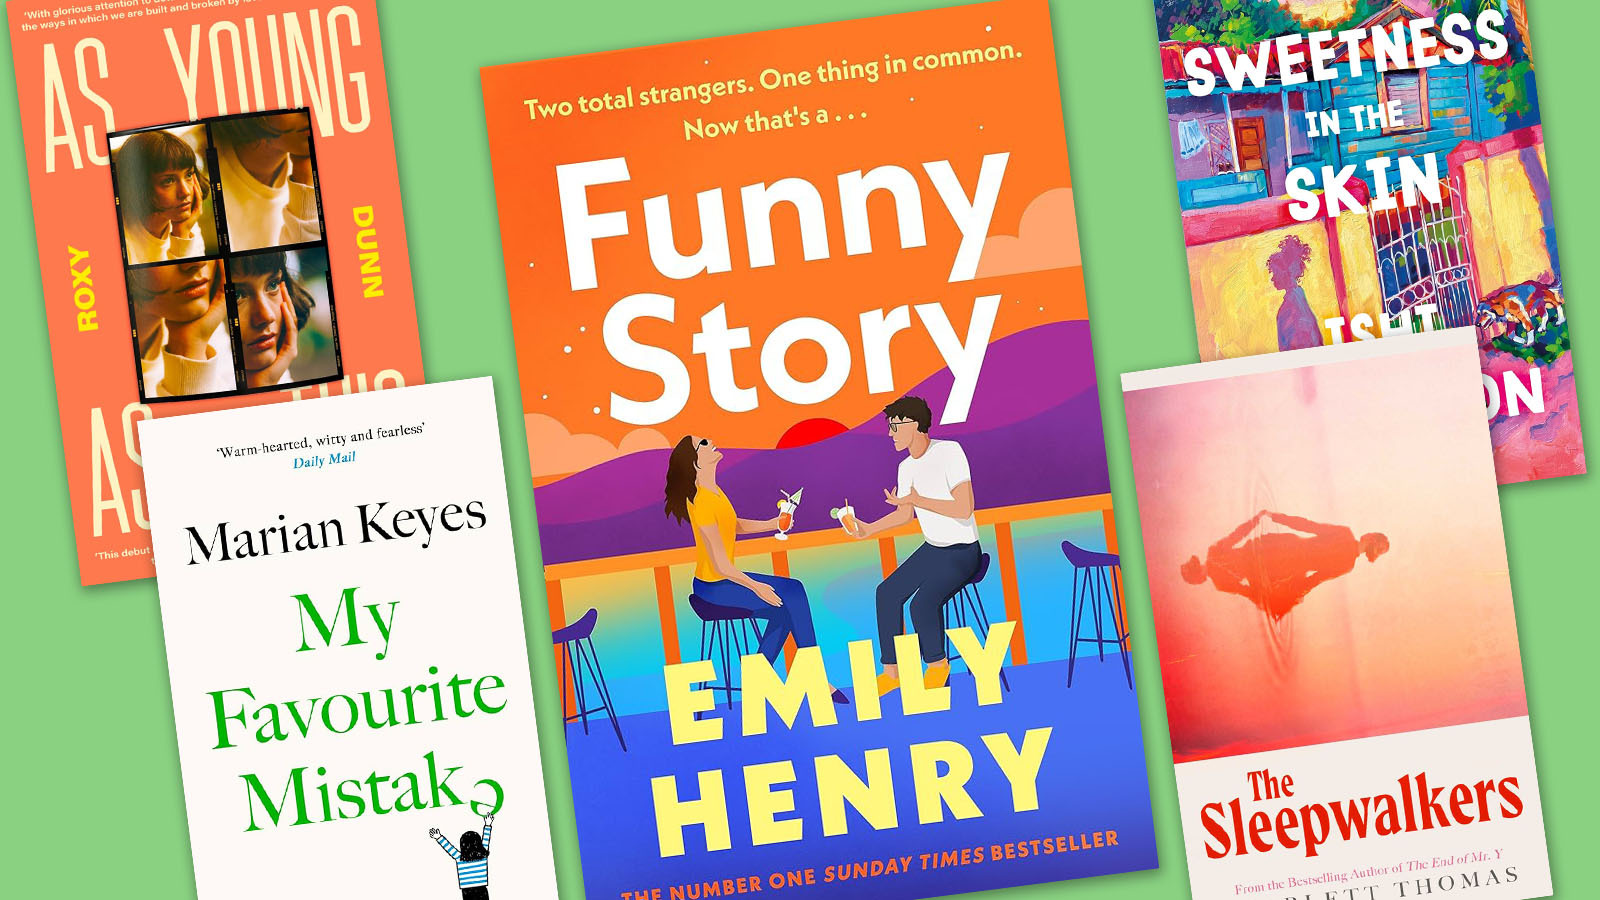 New popular fiction for April — books by Marian Keyes, Emily Henry and more